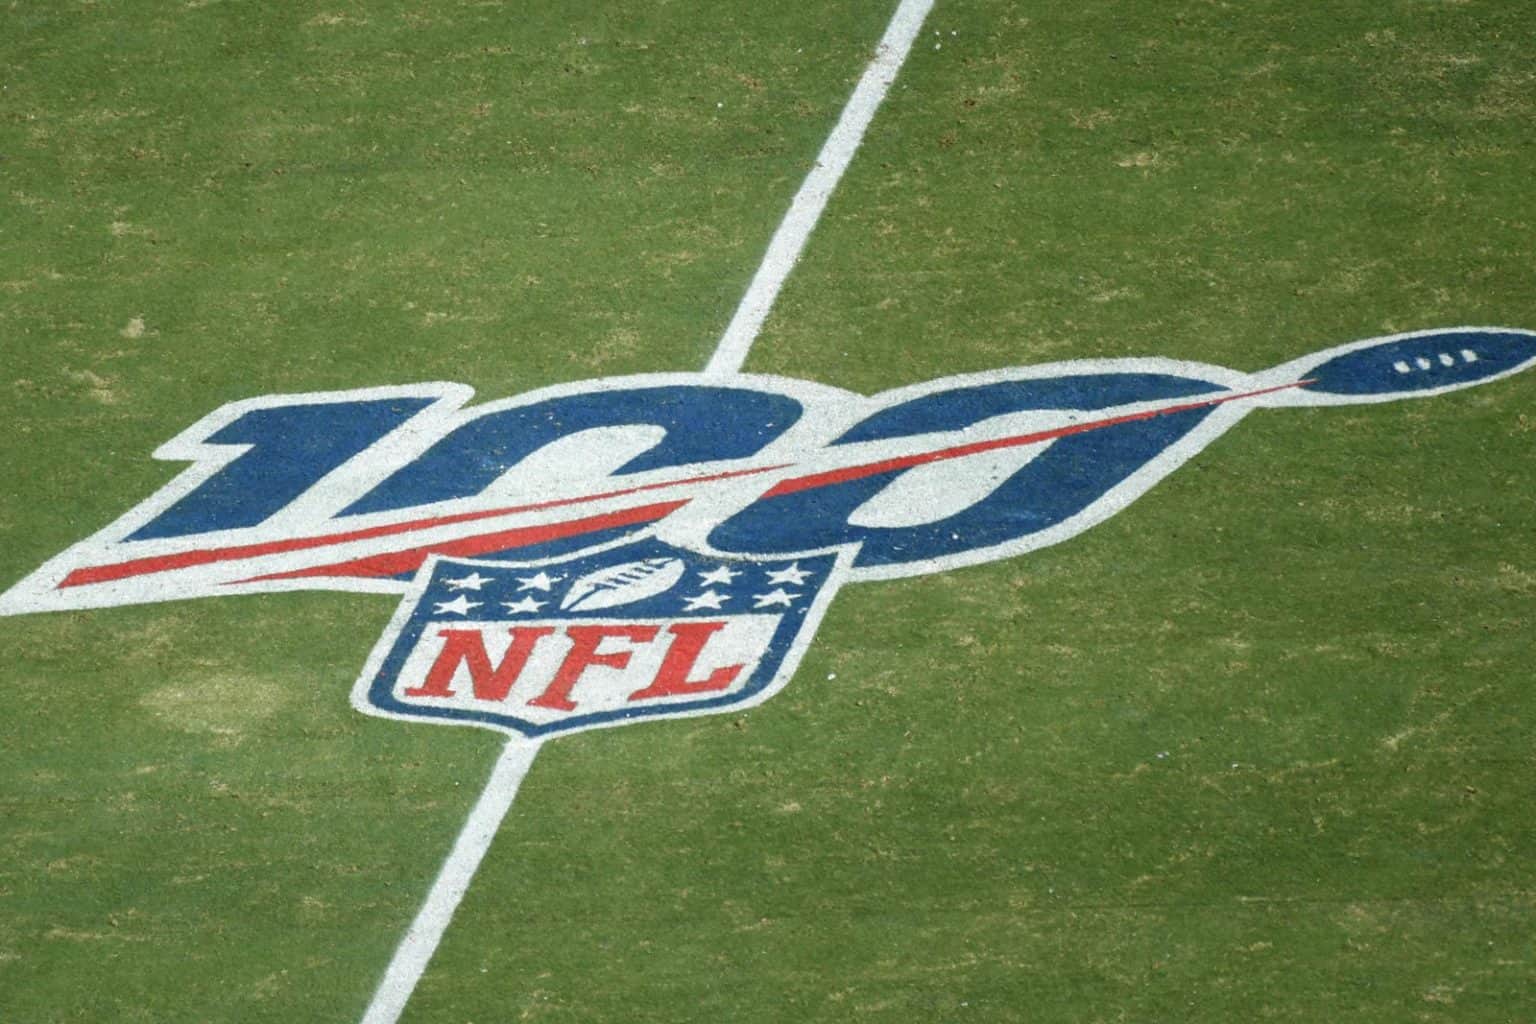 NFL Playoff Schedule 2020 Dates, time, and TV for AFC, NFC games